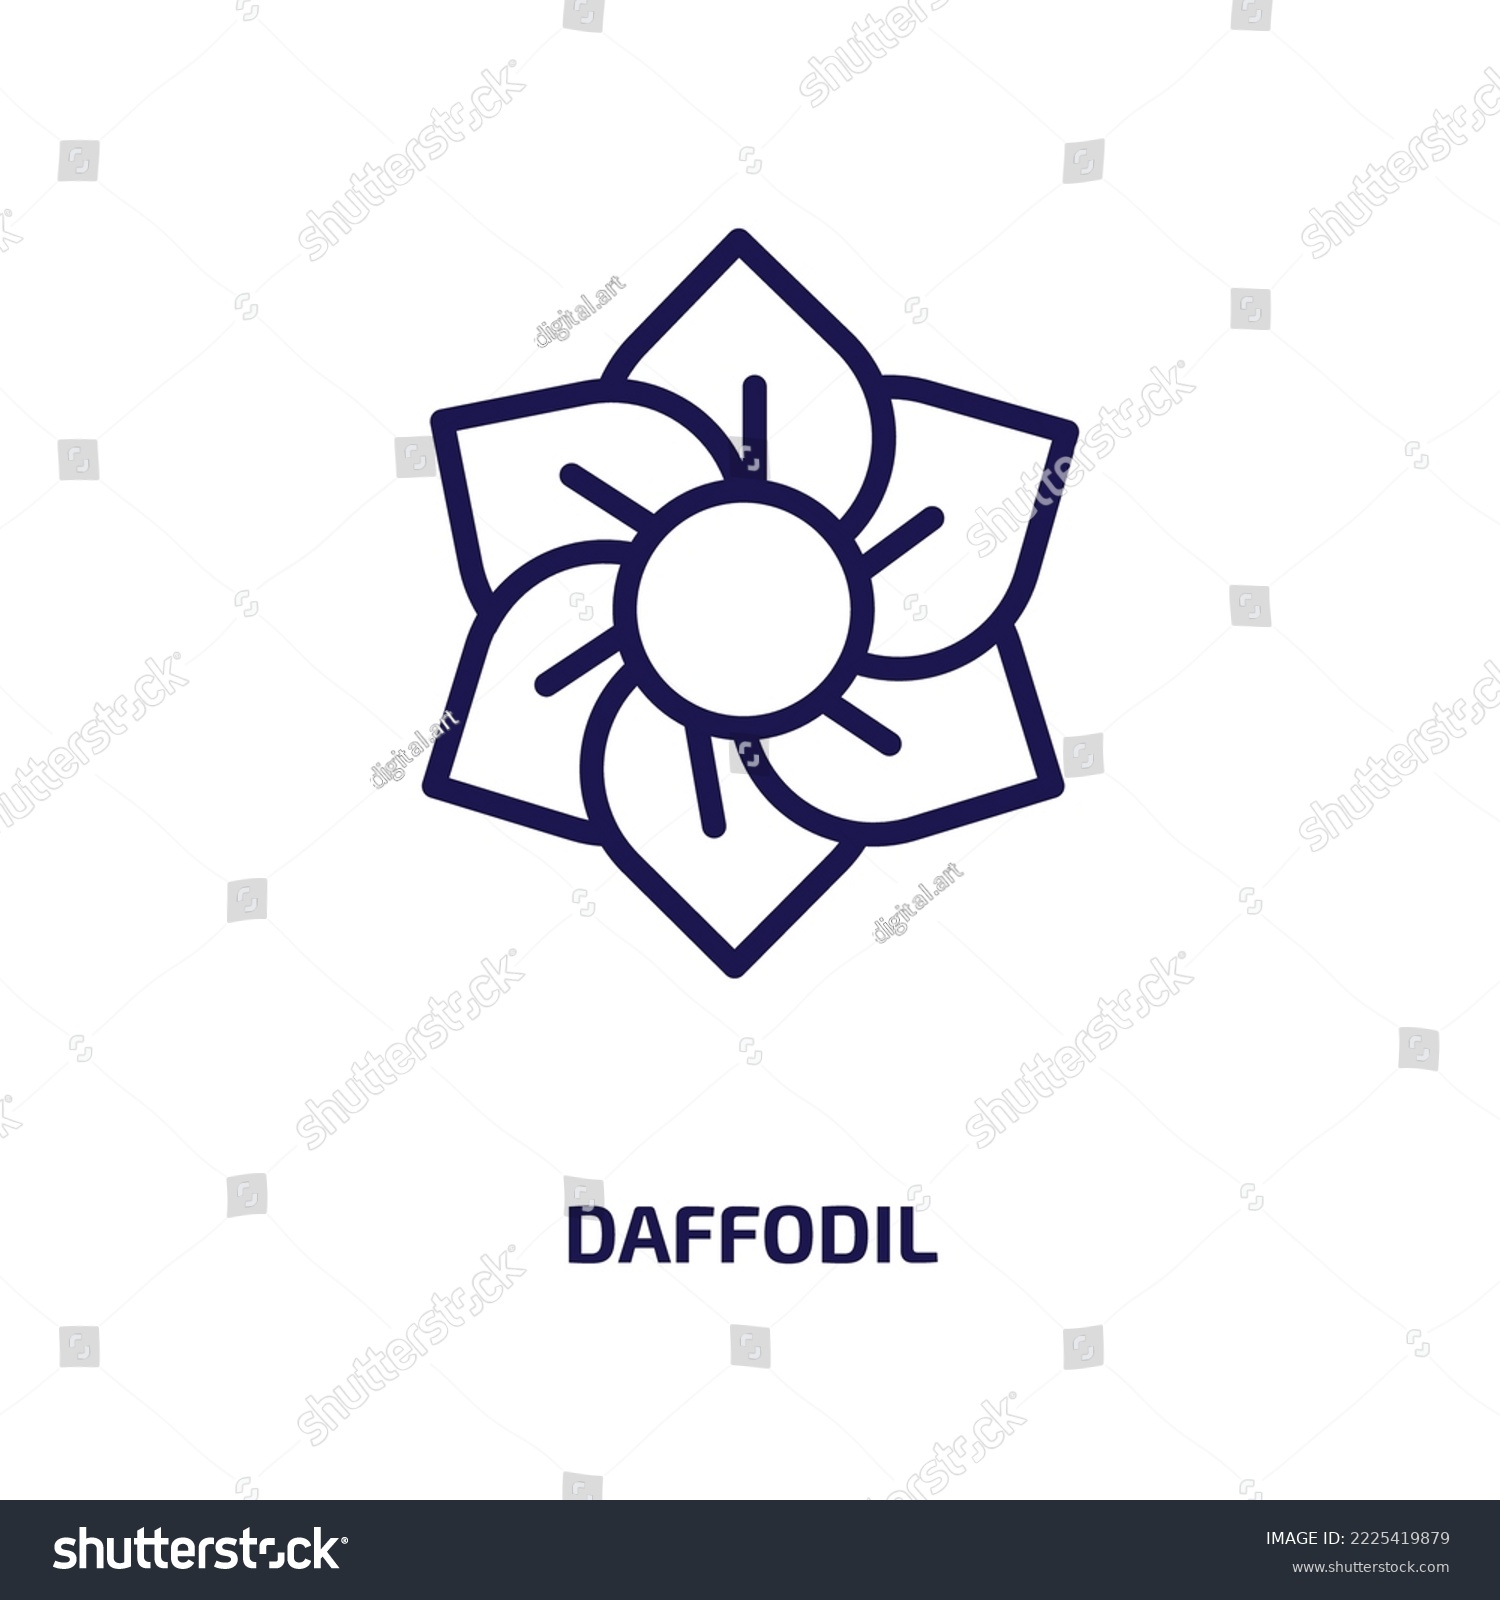 SVG of daffodil icon from nature collection. Thin linear daffodil, nature, flower outline icon isolated on white background. Line vector daffodil sign, symbol for web and mobile svg